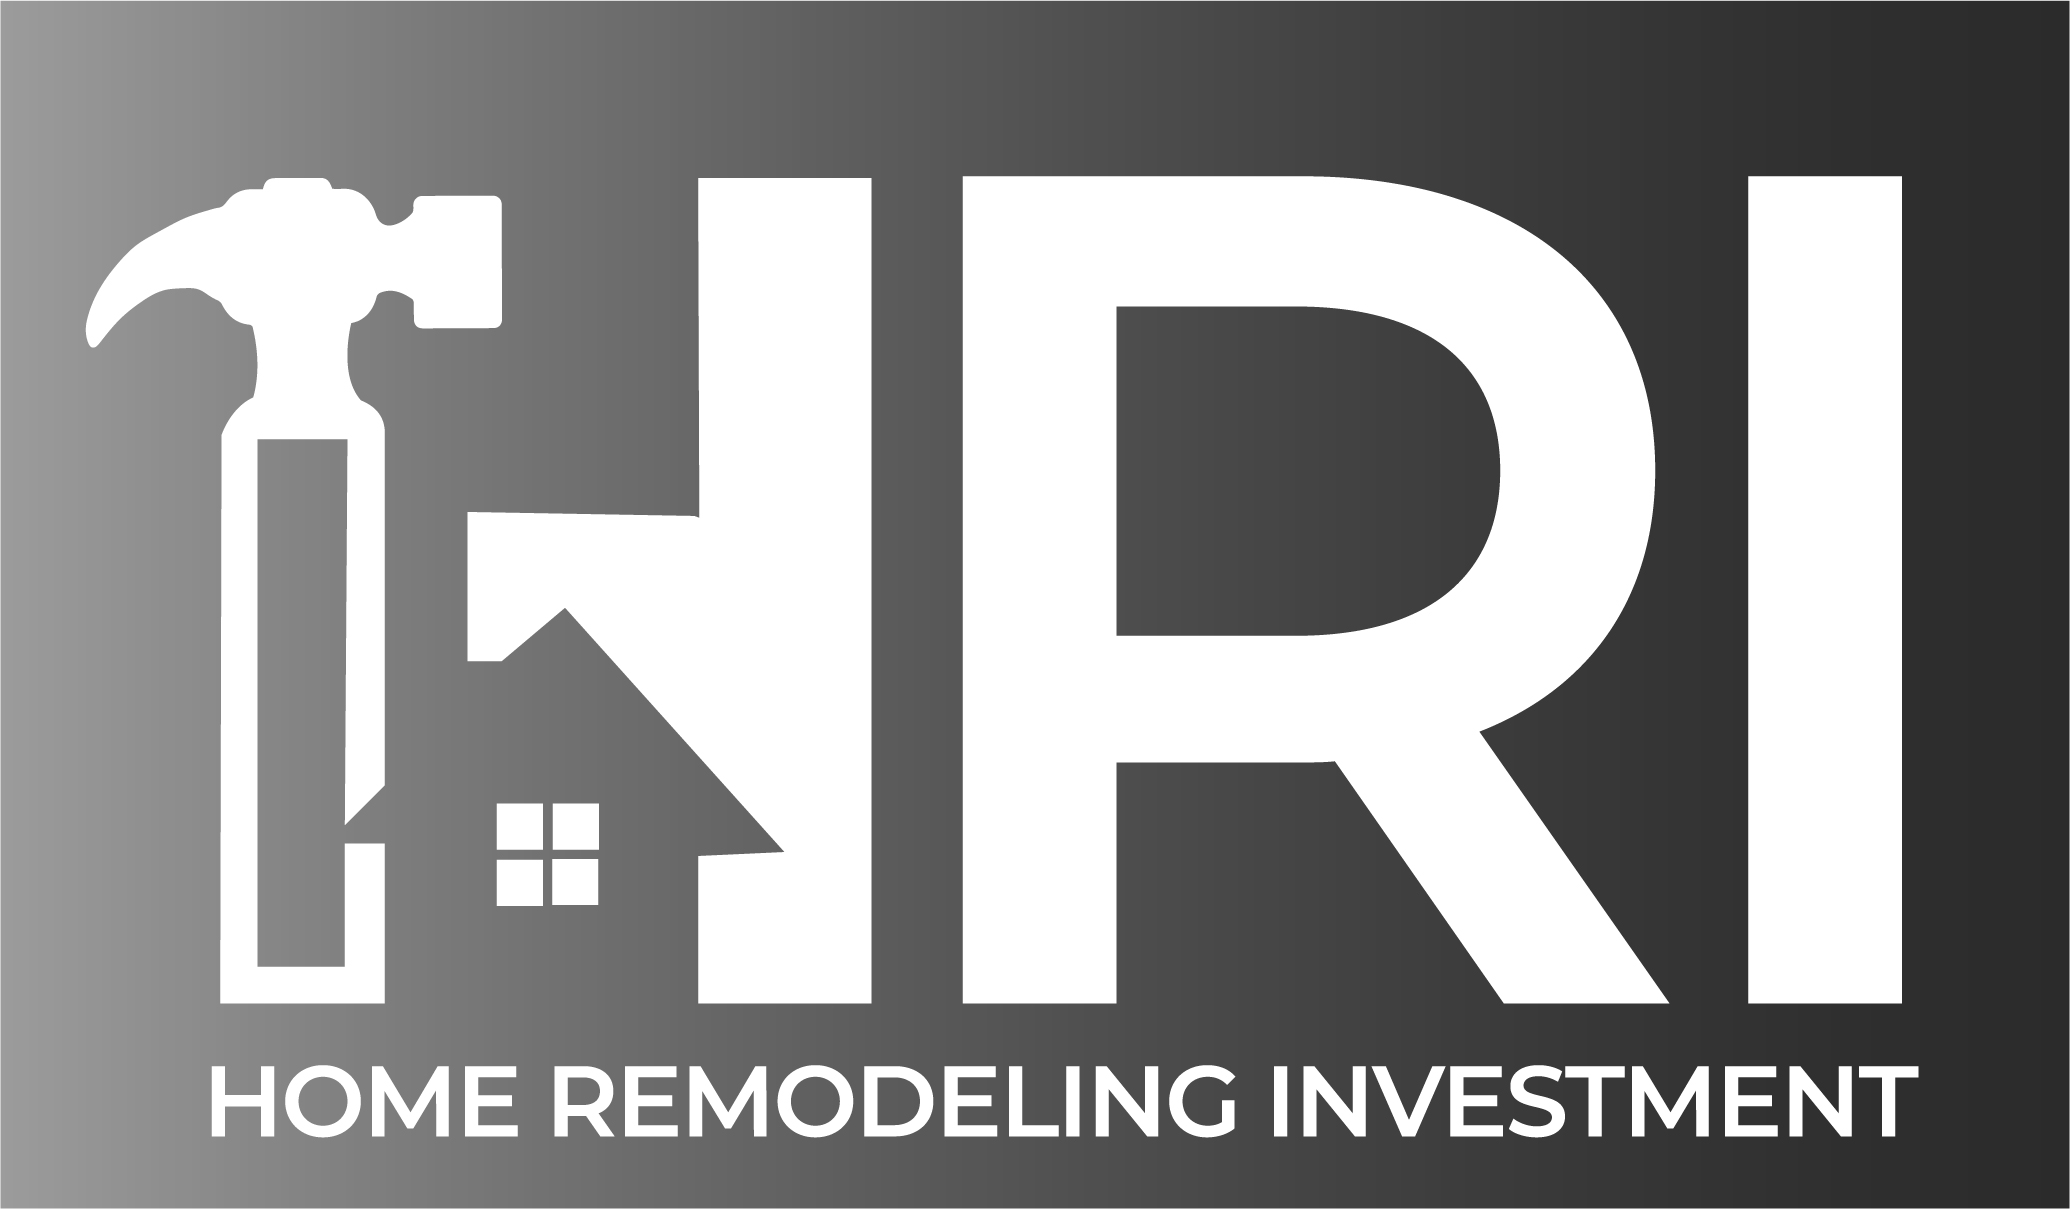 Home Remodeling Investment